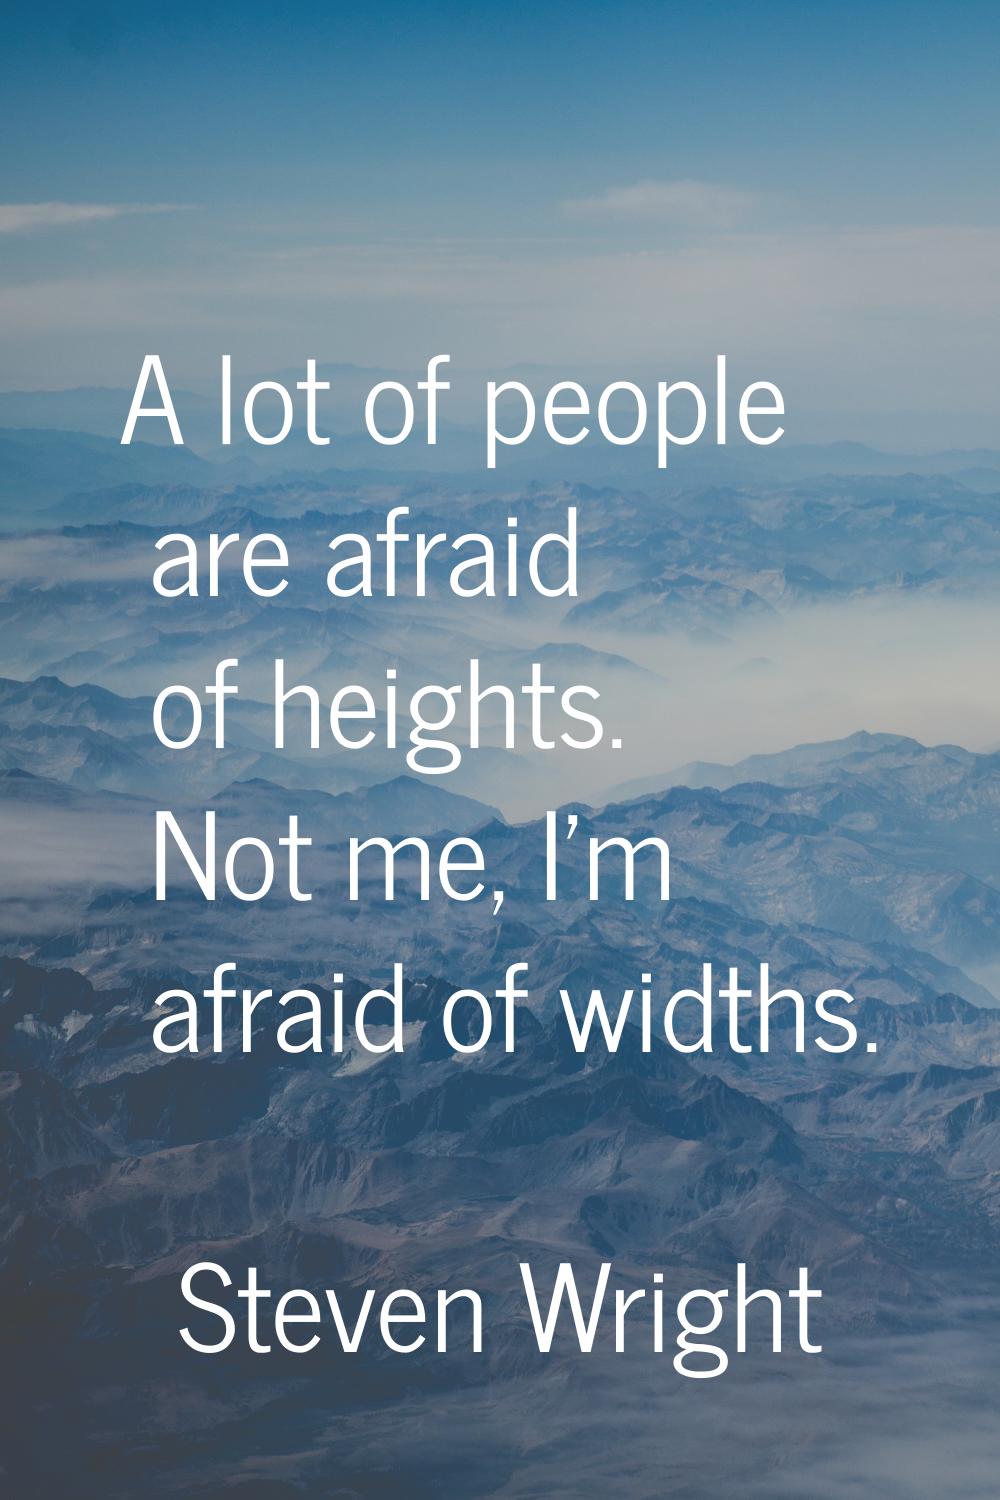 A lot of people are afraid of heights. Not me, I'm afraid of widths.